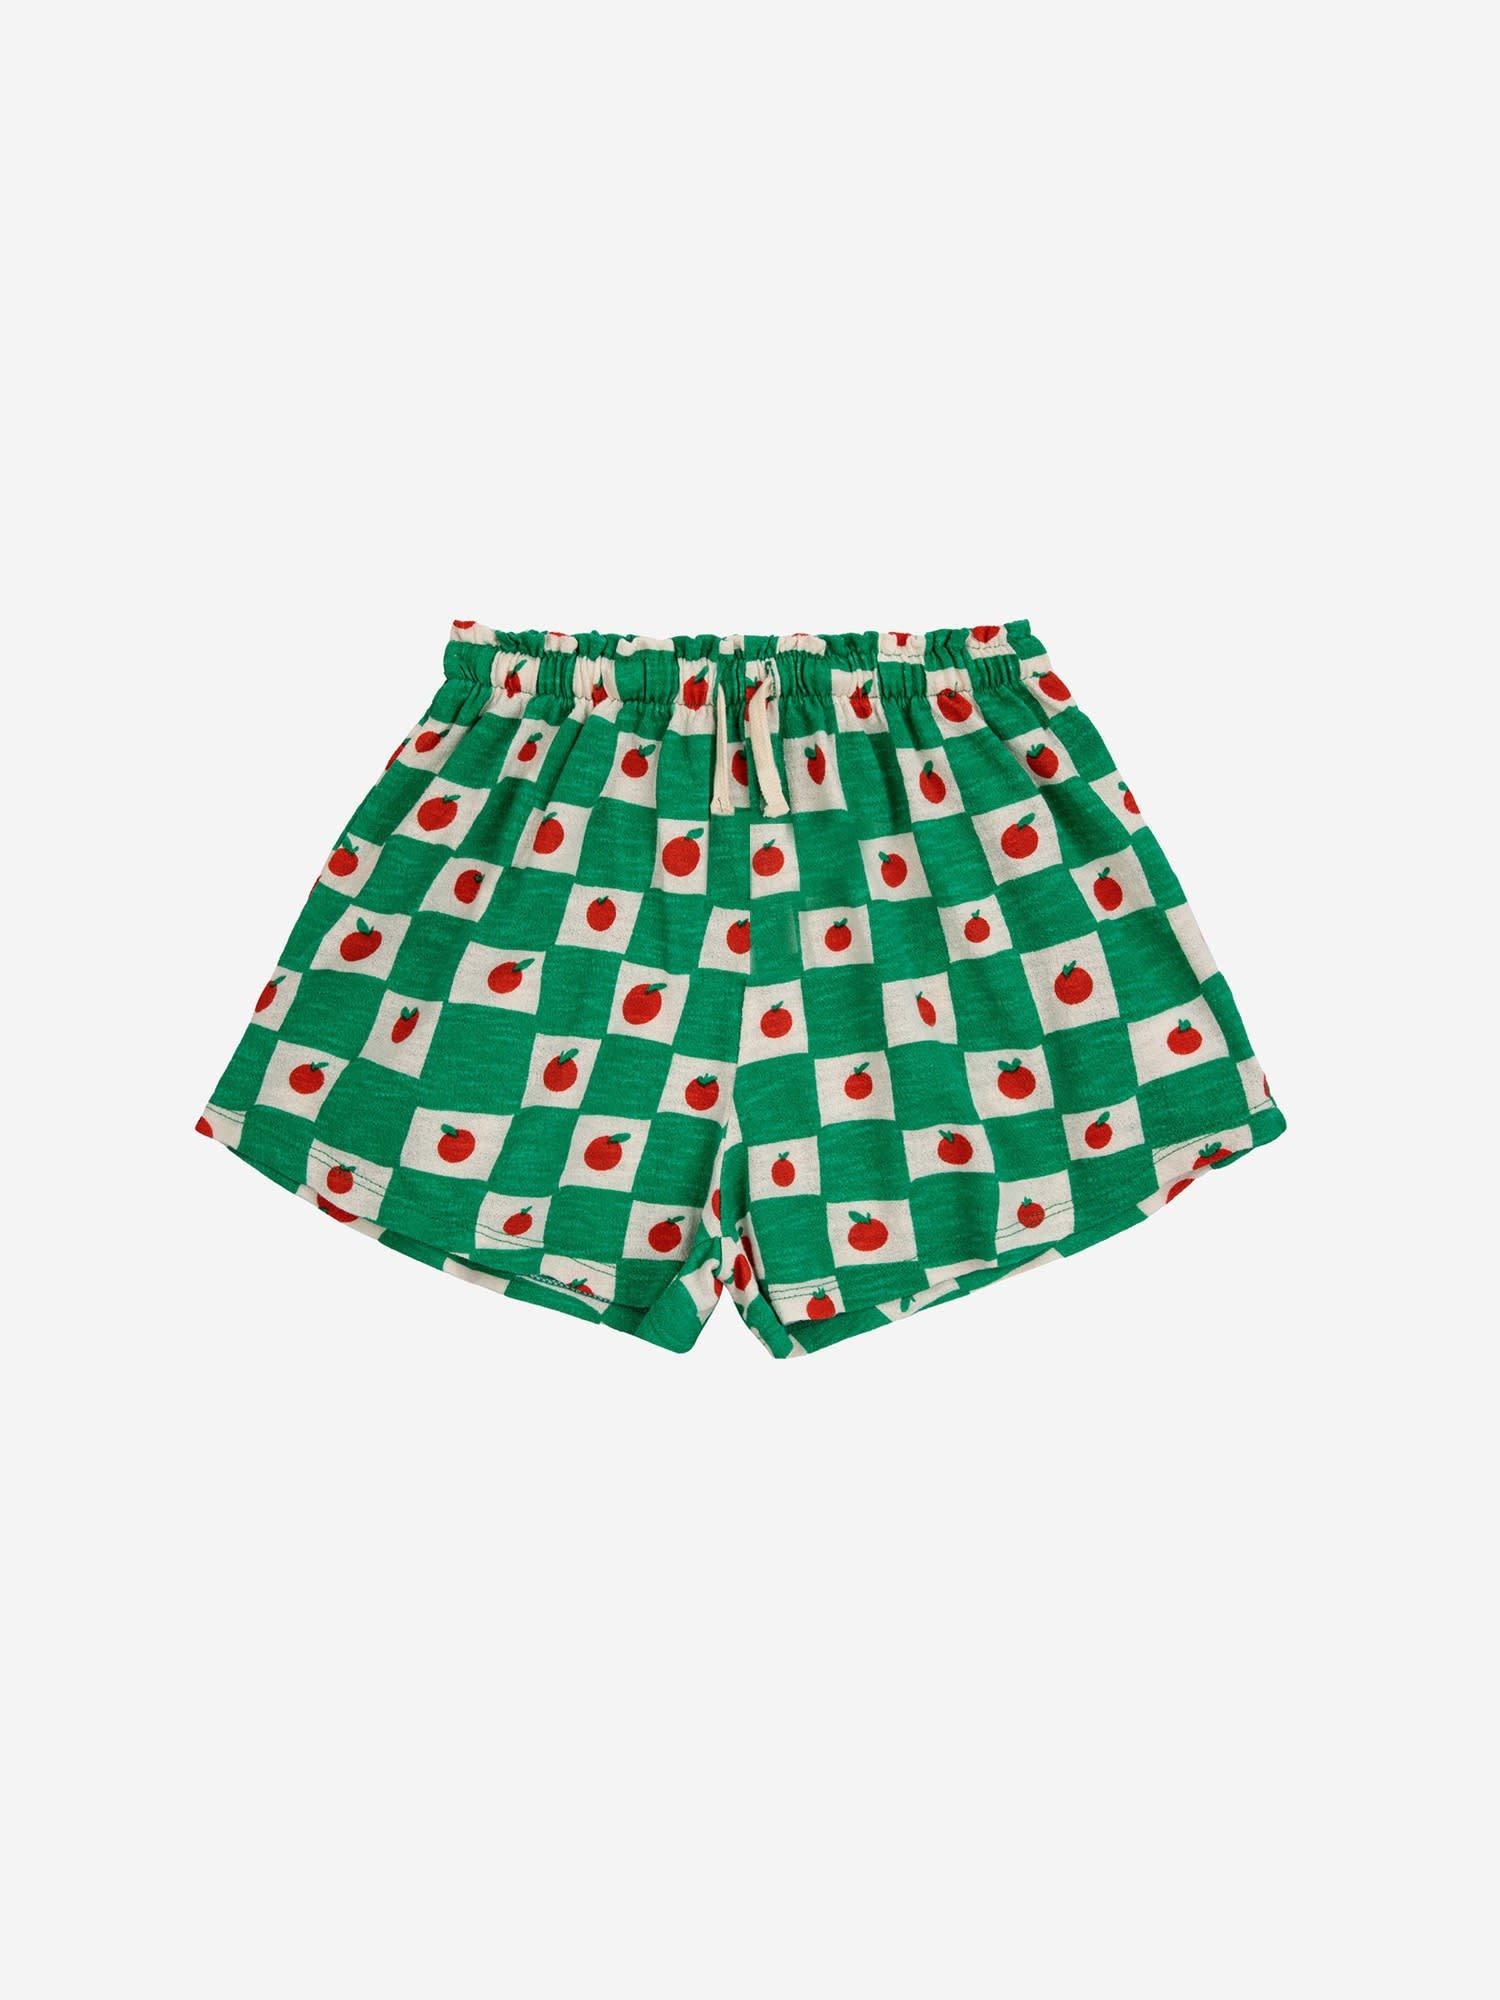 Bobo Choses Colorful Shorts For Kids With Tomatos In Green